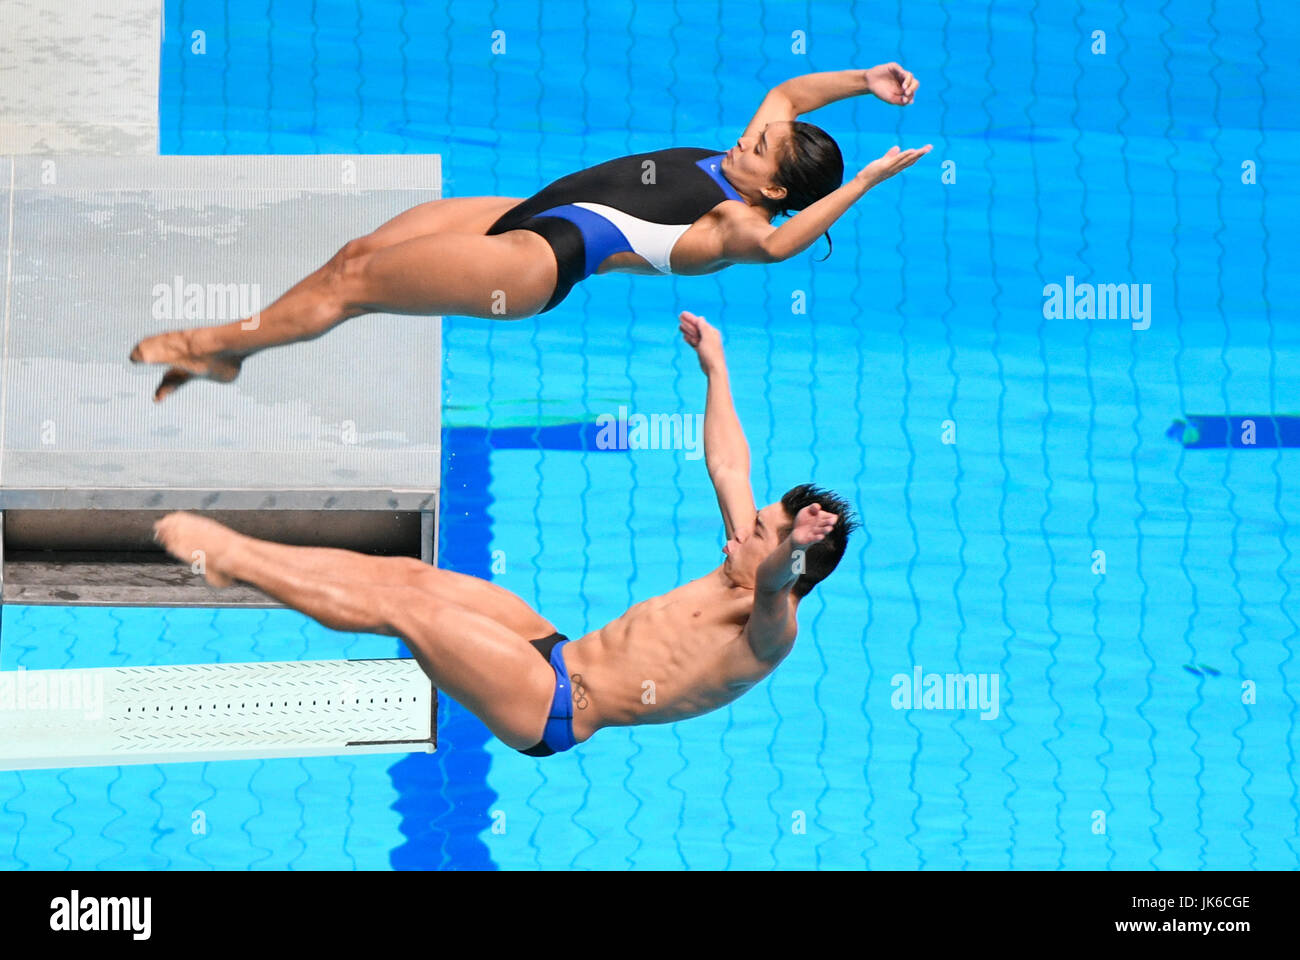 Budapest, Hungary. 22nd July, 2017. Mexico's Julian Sanchez and Arantxa Chavez Munoz in action during the 3m springboard synchro mixed of the FINA World Championships 2017 in Budapest, Hungary, 22 July 2017. Photo: Axel Heimken/dpa/Alamy Live News Stock Photo